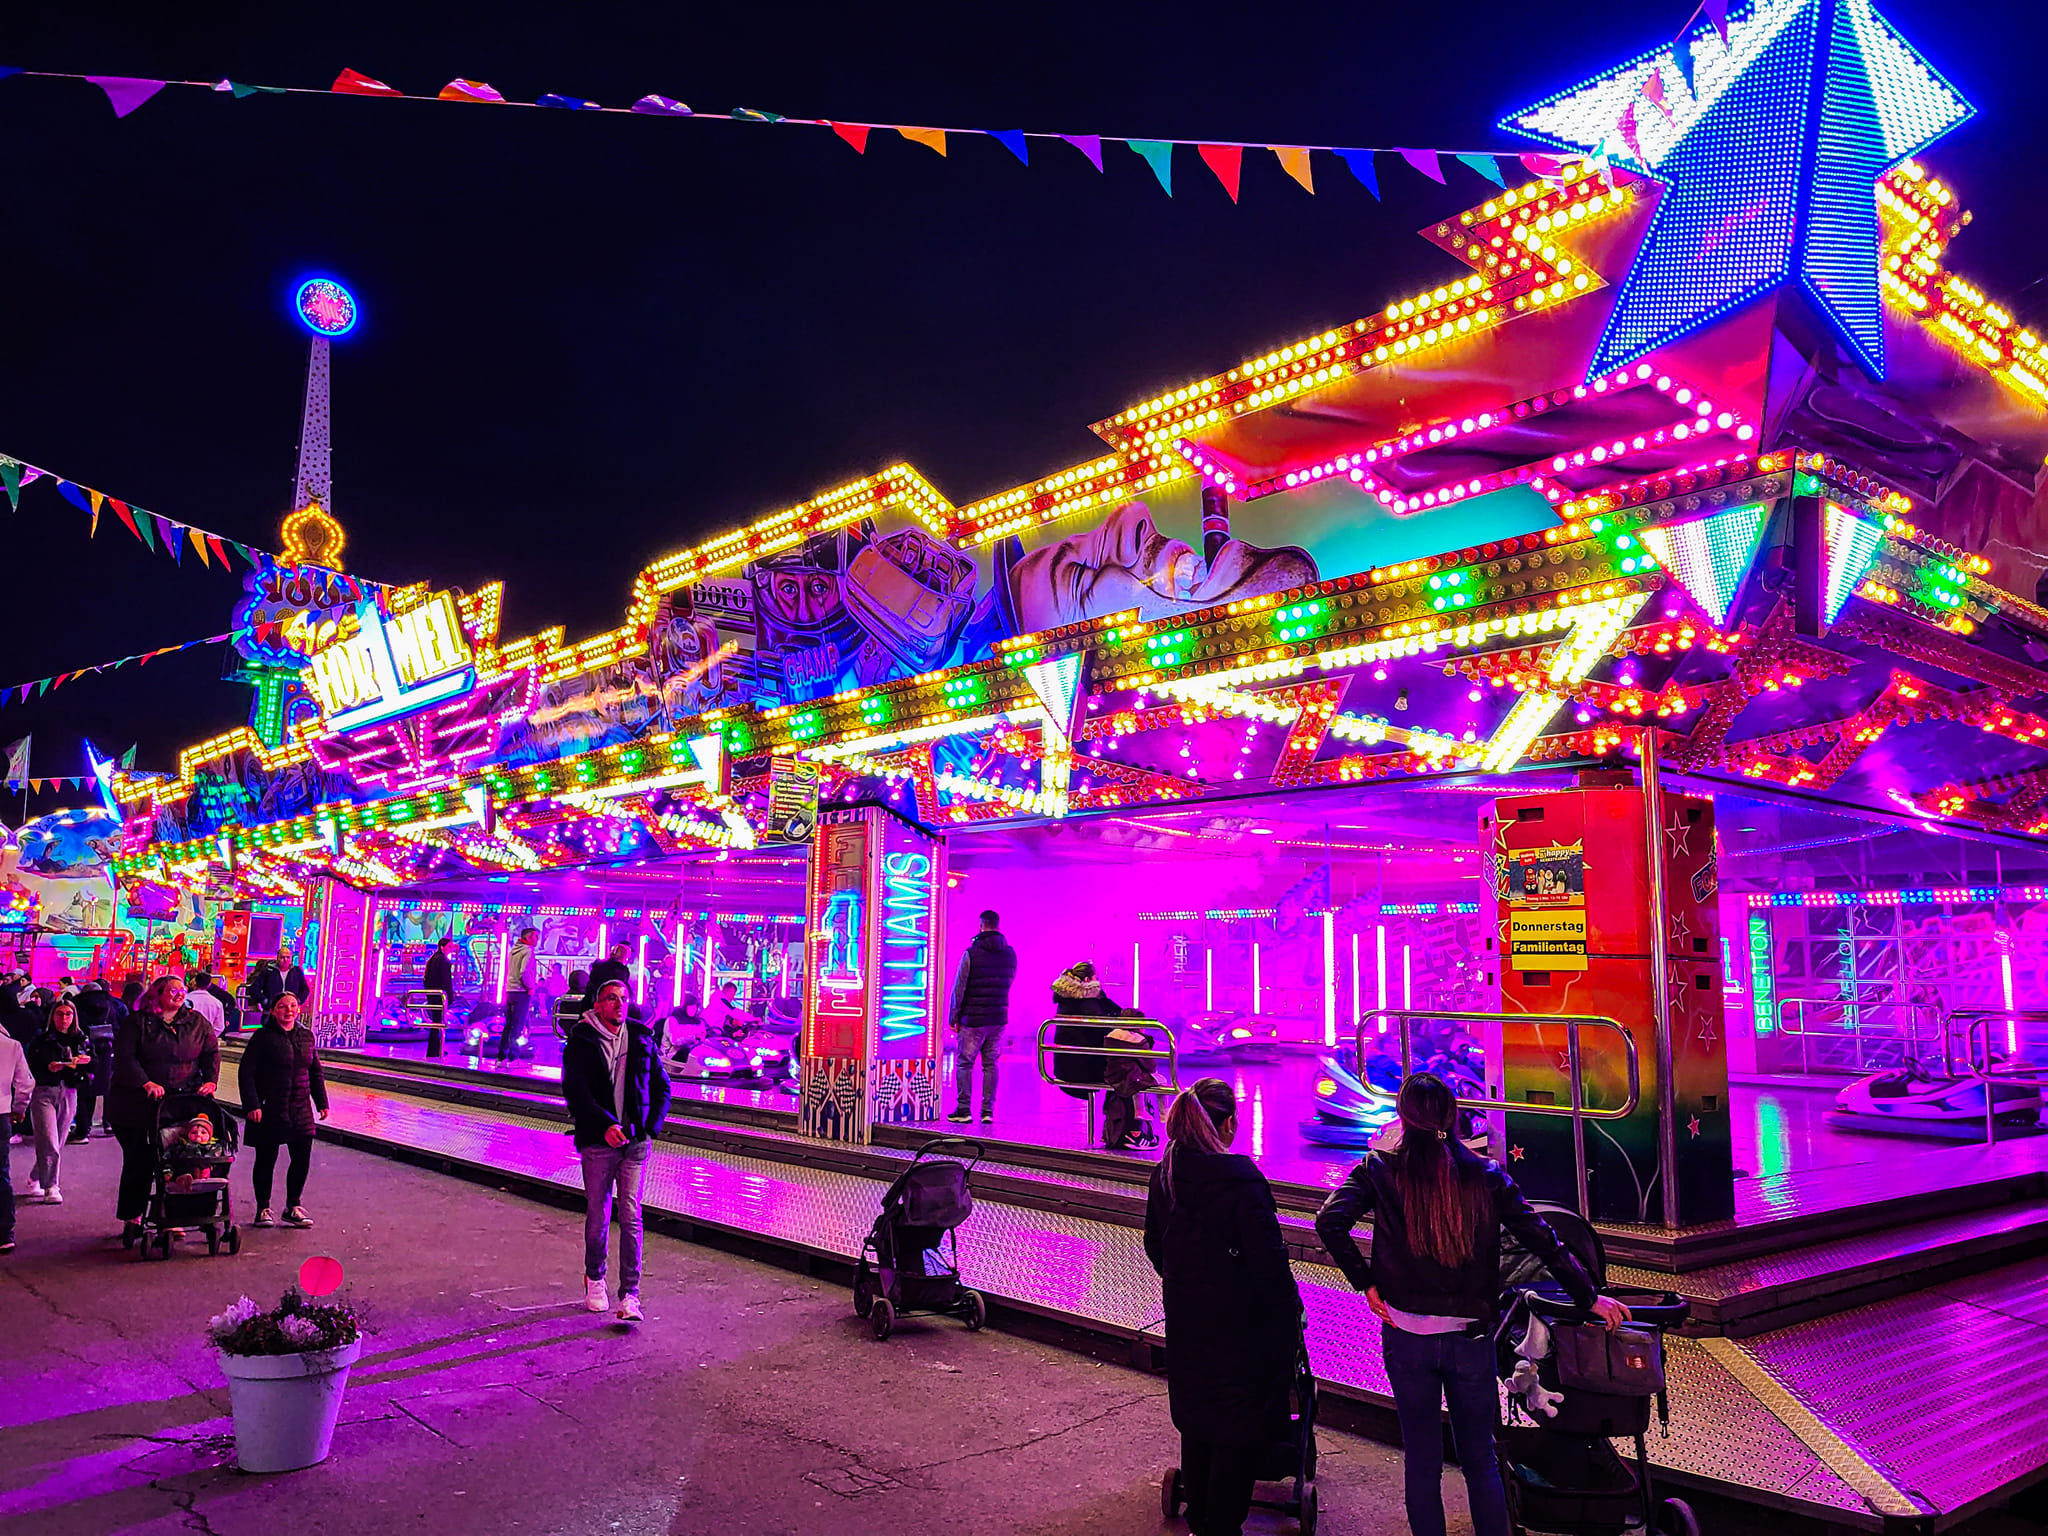 How do Carnival Rides Control RGB LED lights individually?